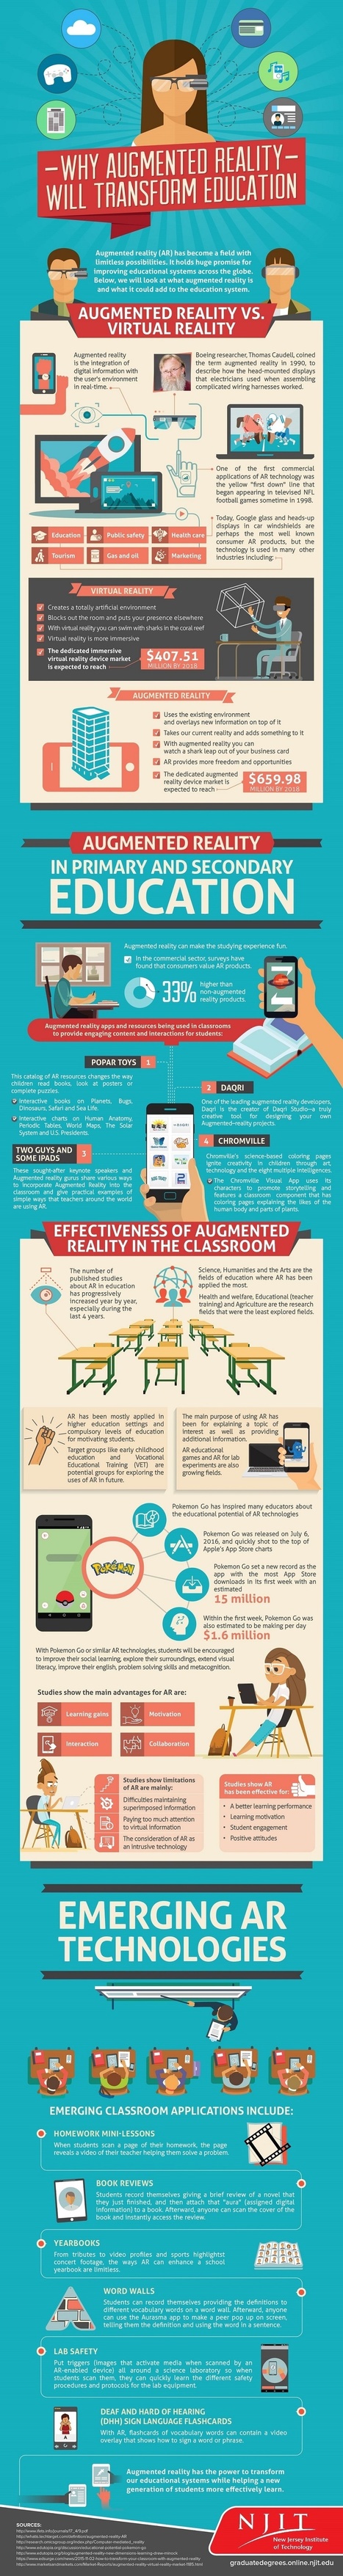 Why Augmented Reality Will Transform Education Infographic - e-Learning Infographics | Virtual Reality & Augmented Reality Network | Scoop.it